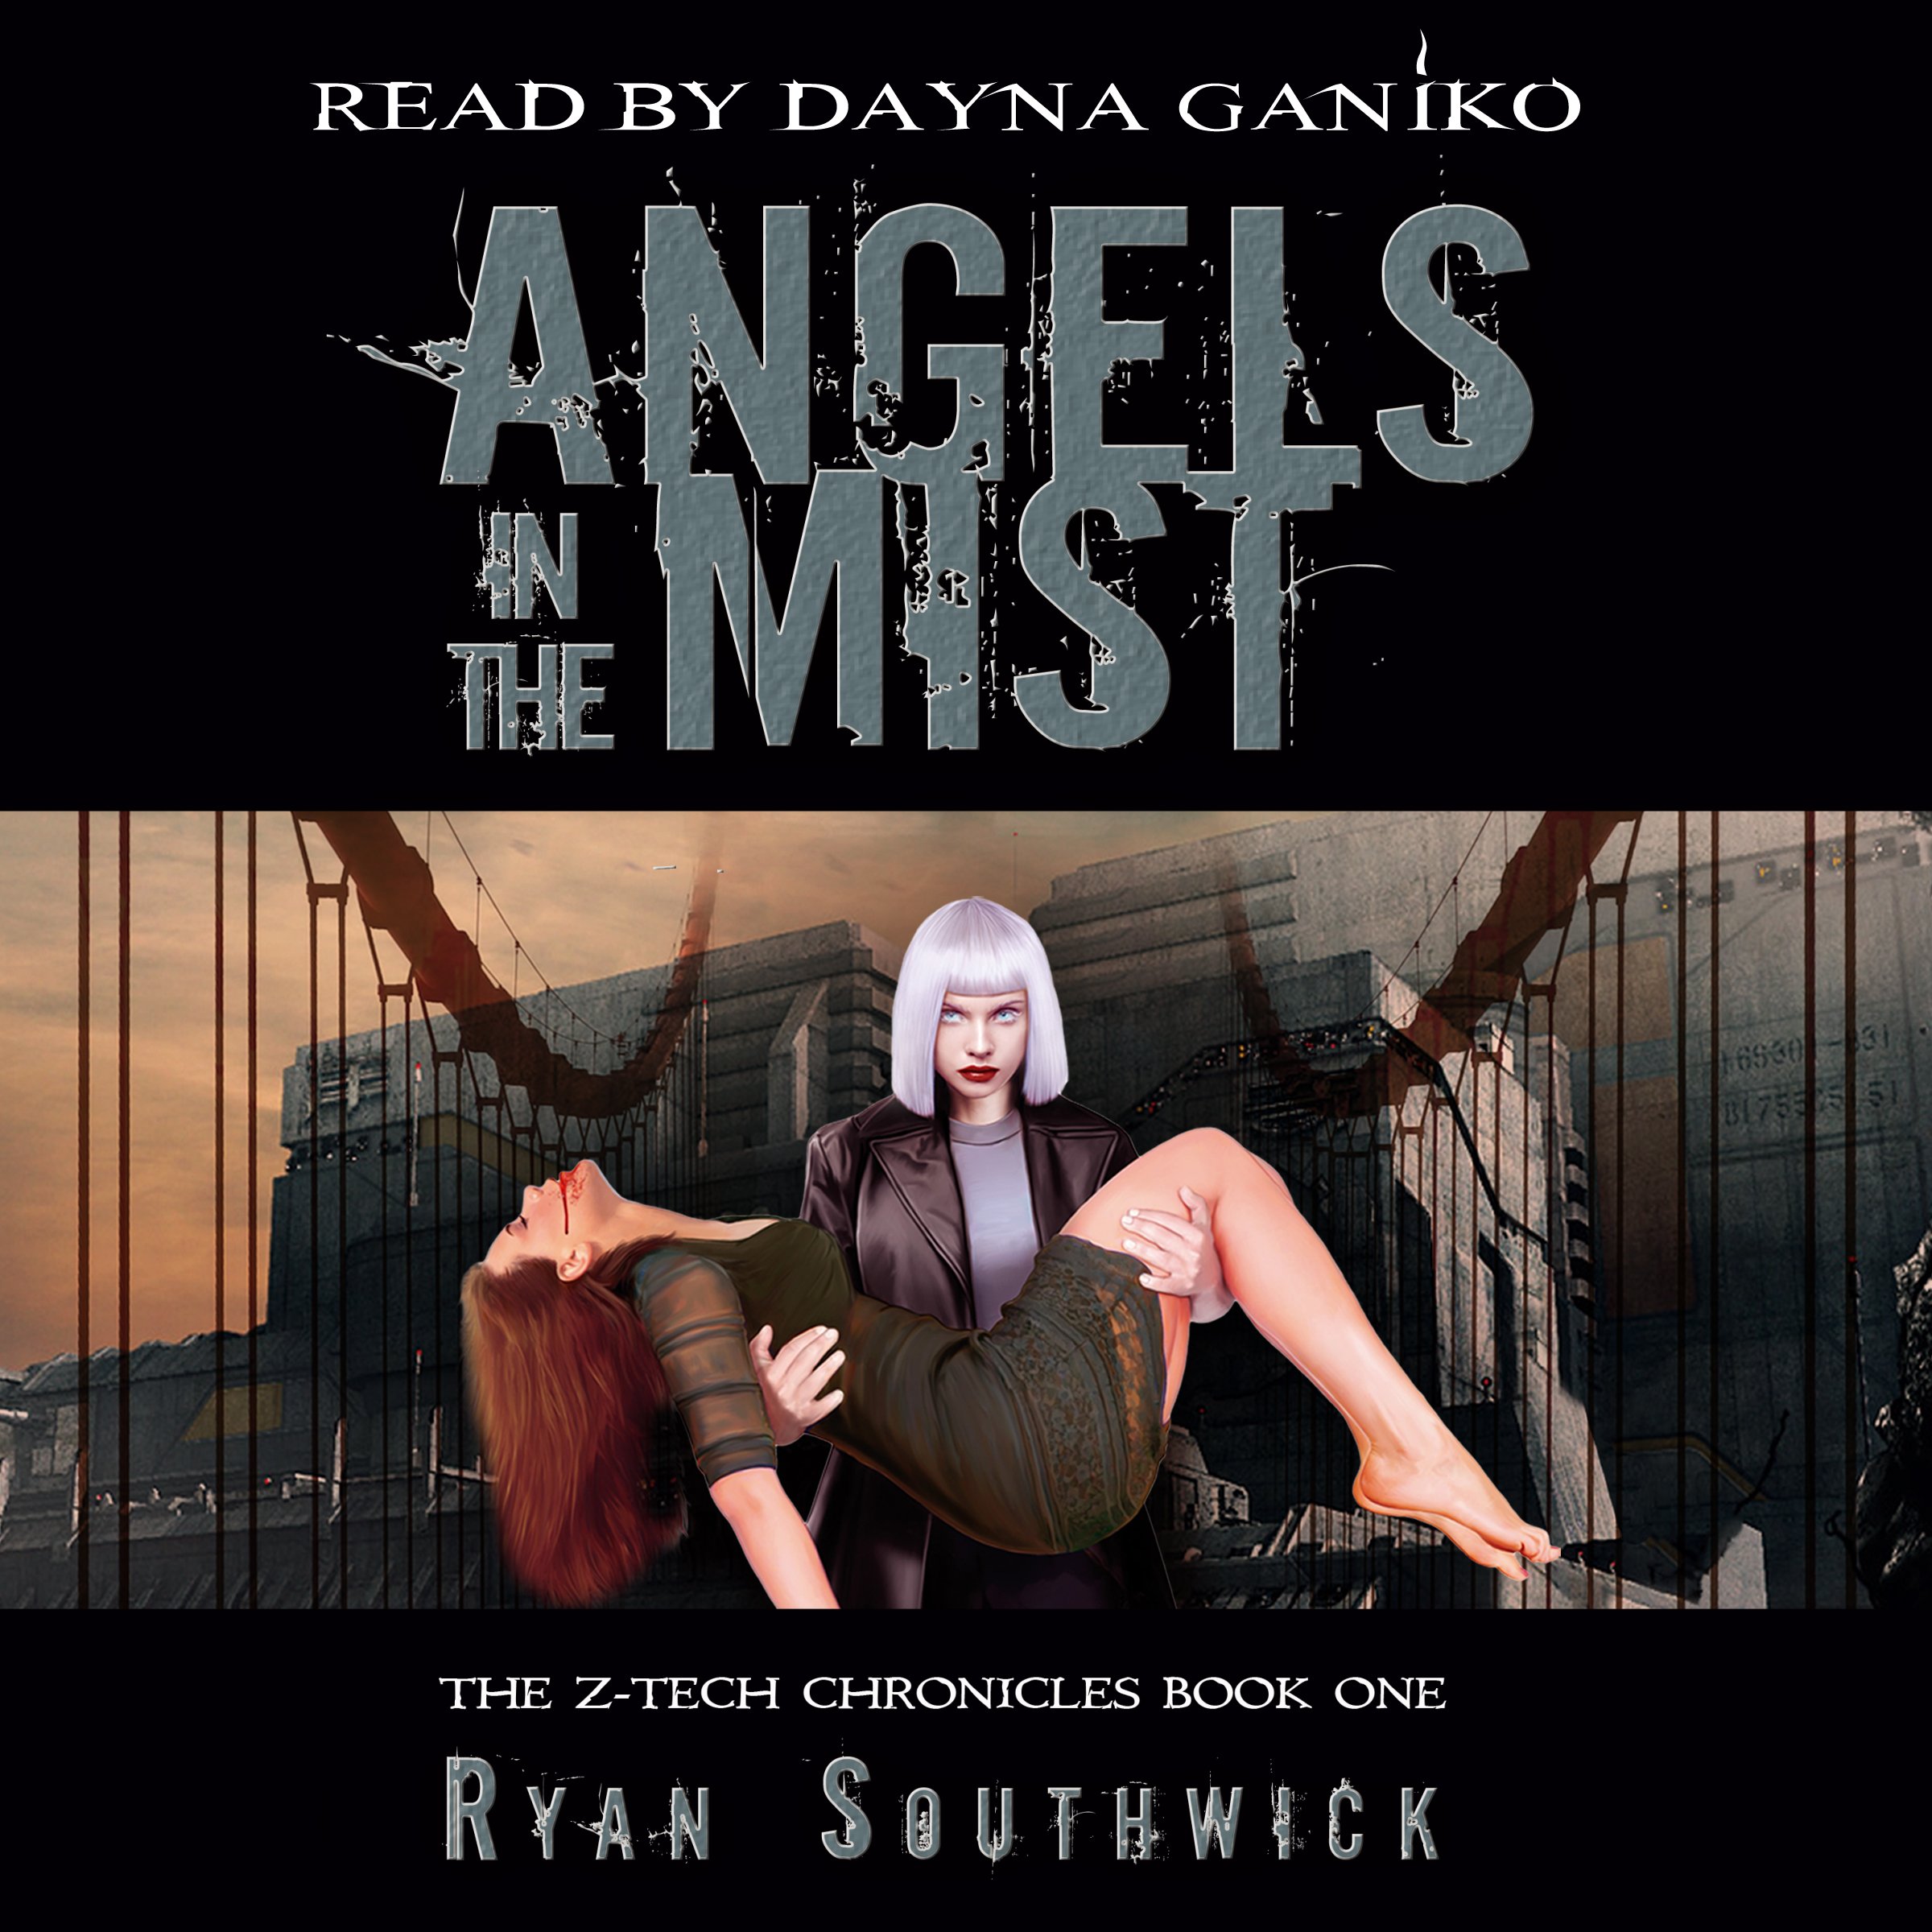 Angels in the Mist (audio edition)